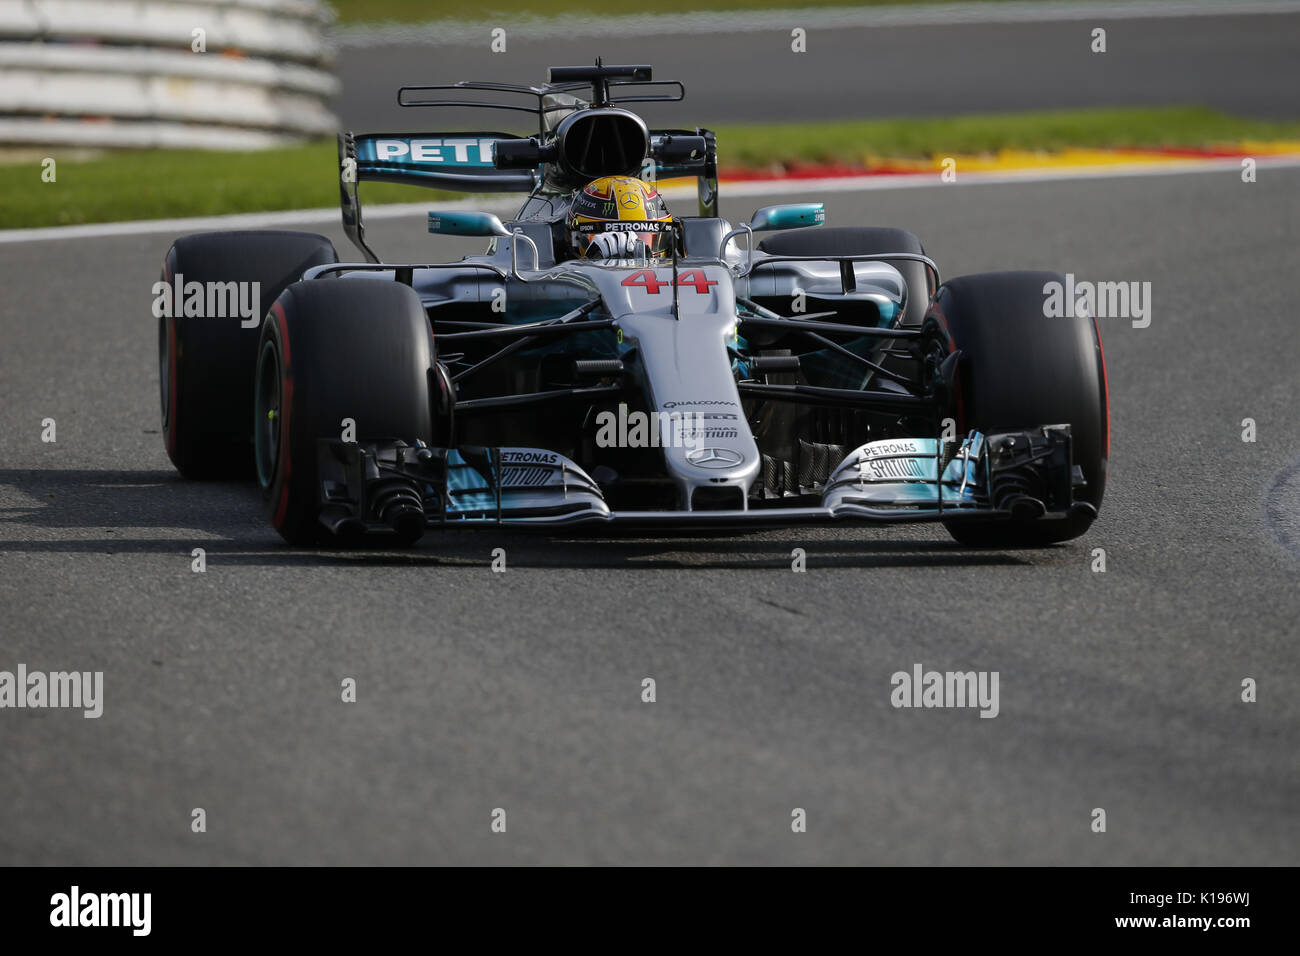 Francorchamps, Belgium. 25th Aug, 2017. LEWIS HAMILTON of Great Britain and Mercedes AMG Petronas F1 Team drives during practice session of the 2017 Formula 1 Belgian Grand Prix in Francorchamps, Belgium. Credit: James Gasperotti/ZUMA Wire/Alamy Live News Stock Photo